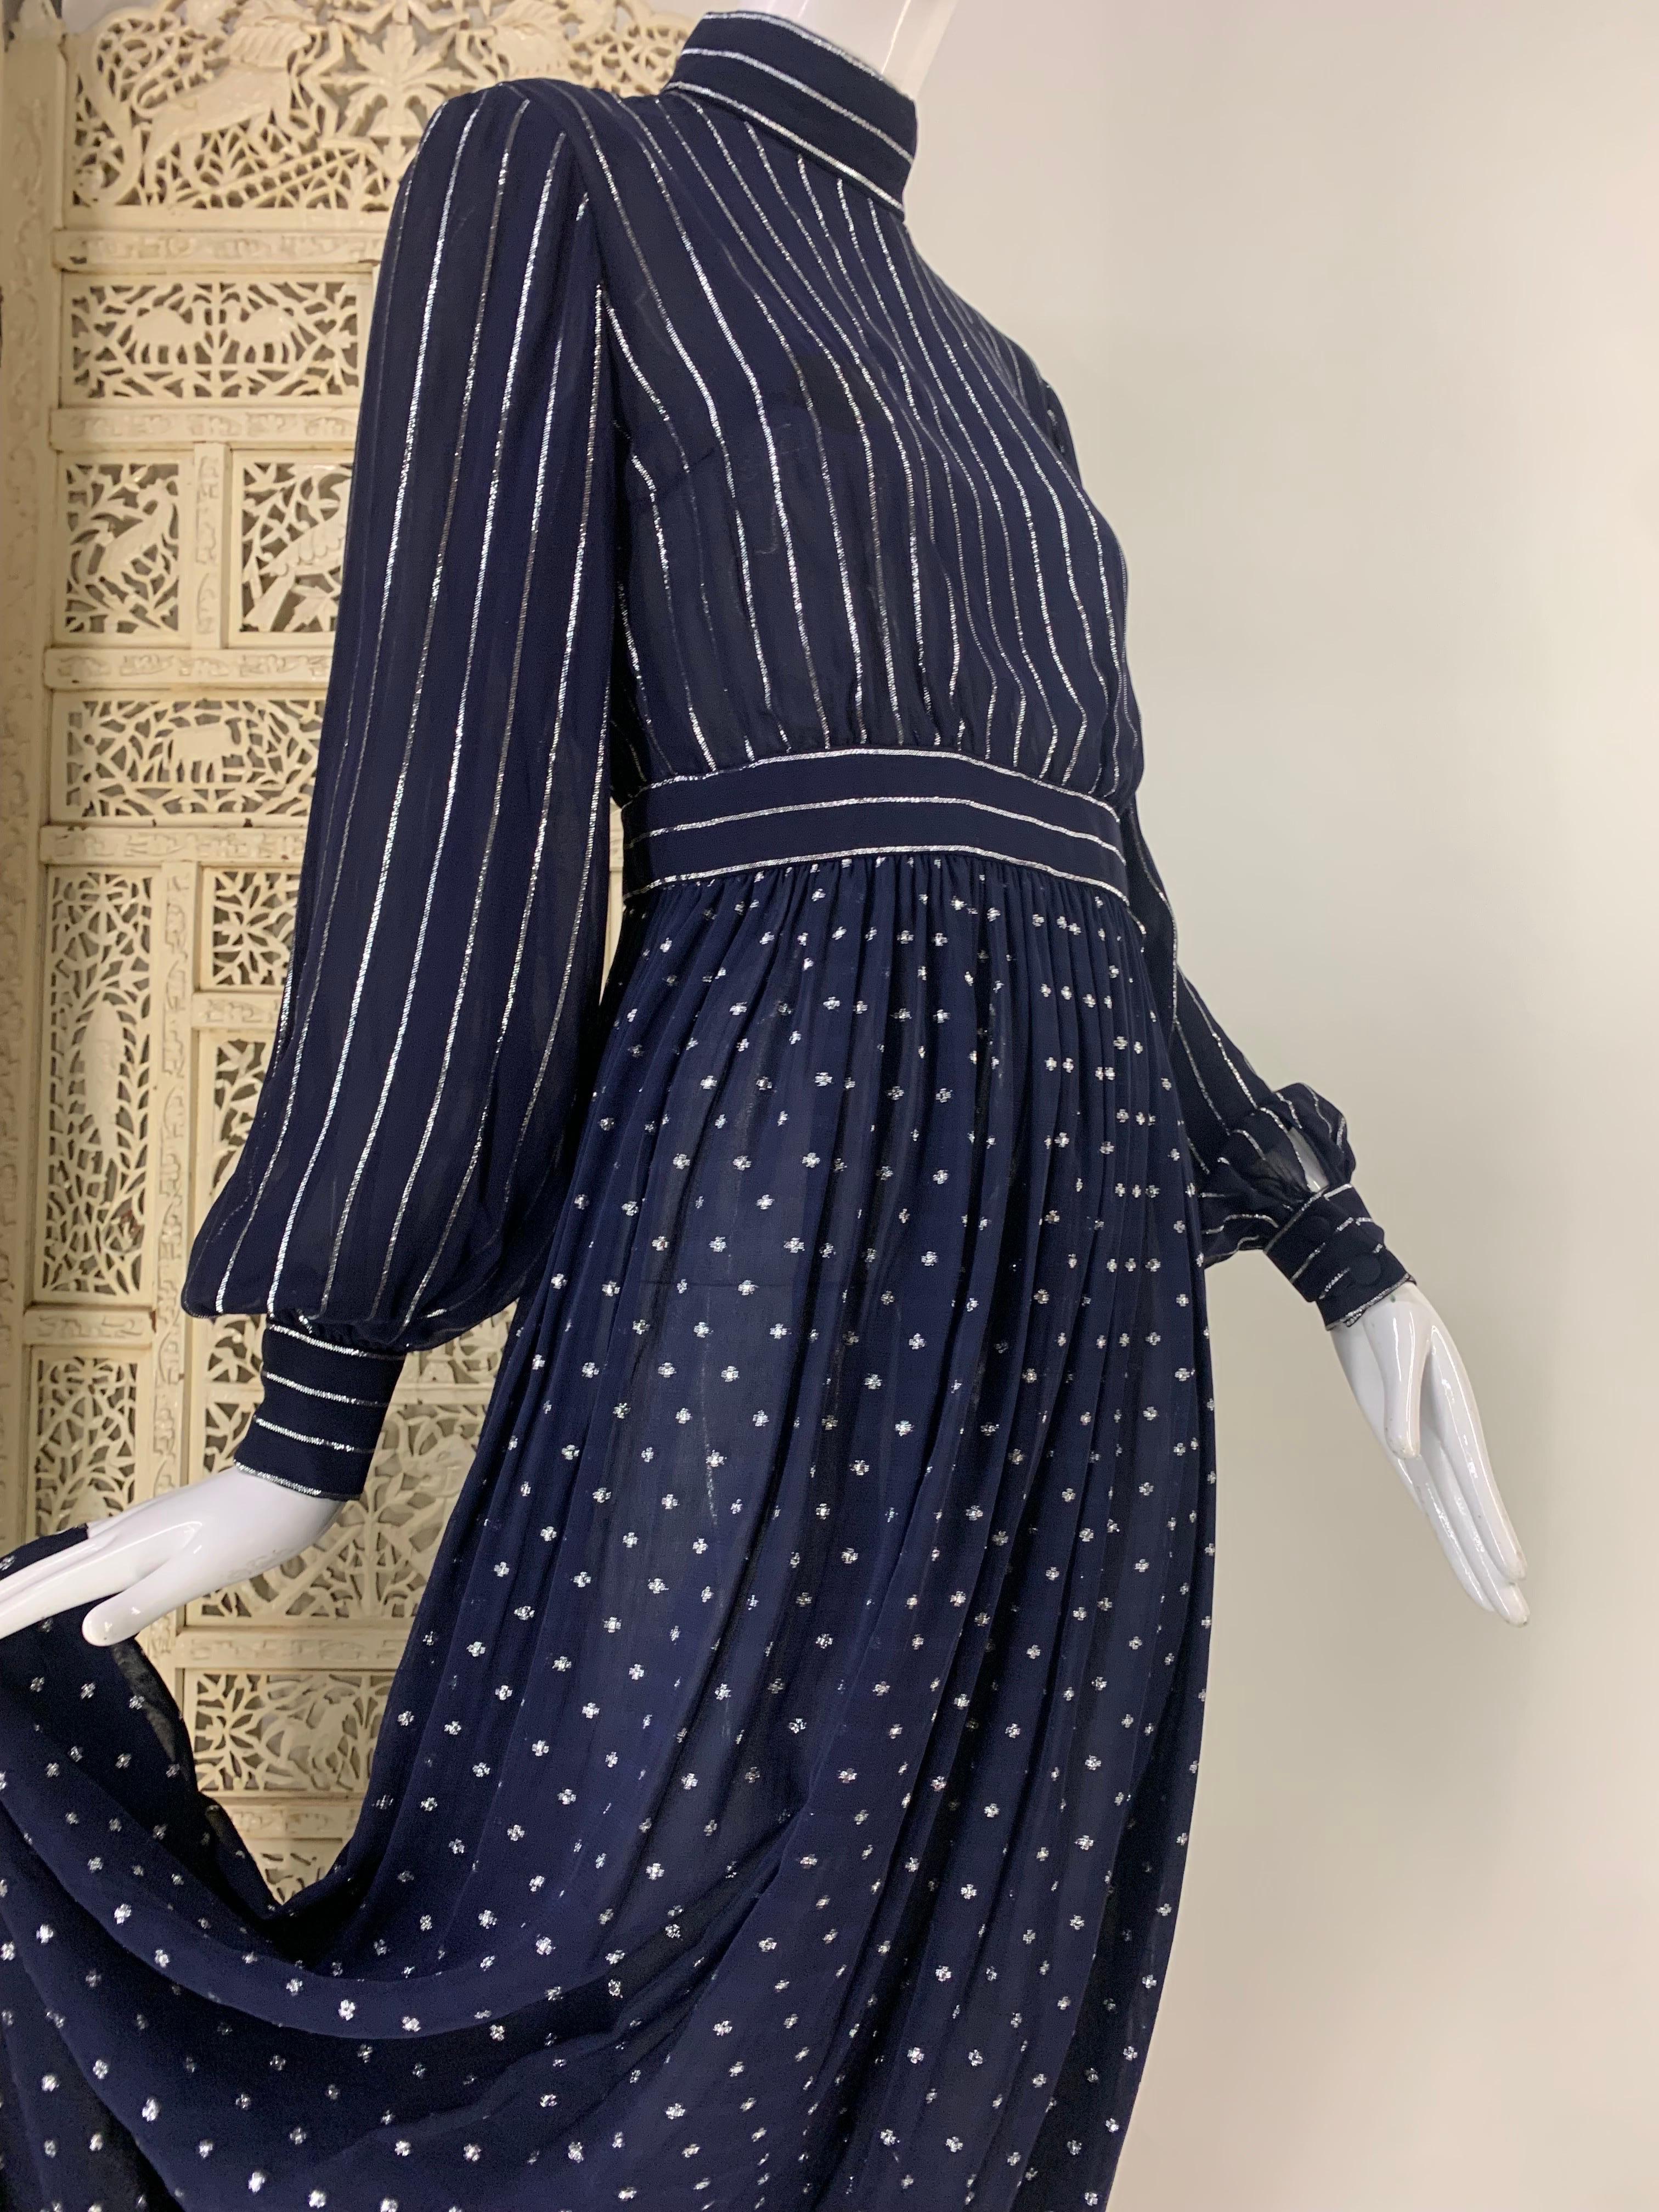 1970s Norman Norell Navy Blue and Silver Lurex Crepe and Chiffon Evening Gown: Banded collar, waist and cuffs. Silver Lurex stripes on bodice and puffed sleeves. Star dotted full length skirt. Back zipper. Lined in chiffon. A true American classic.